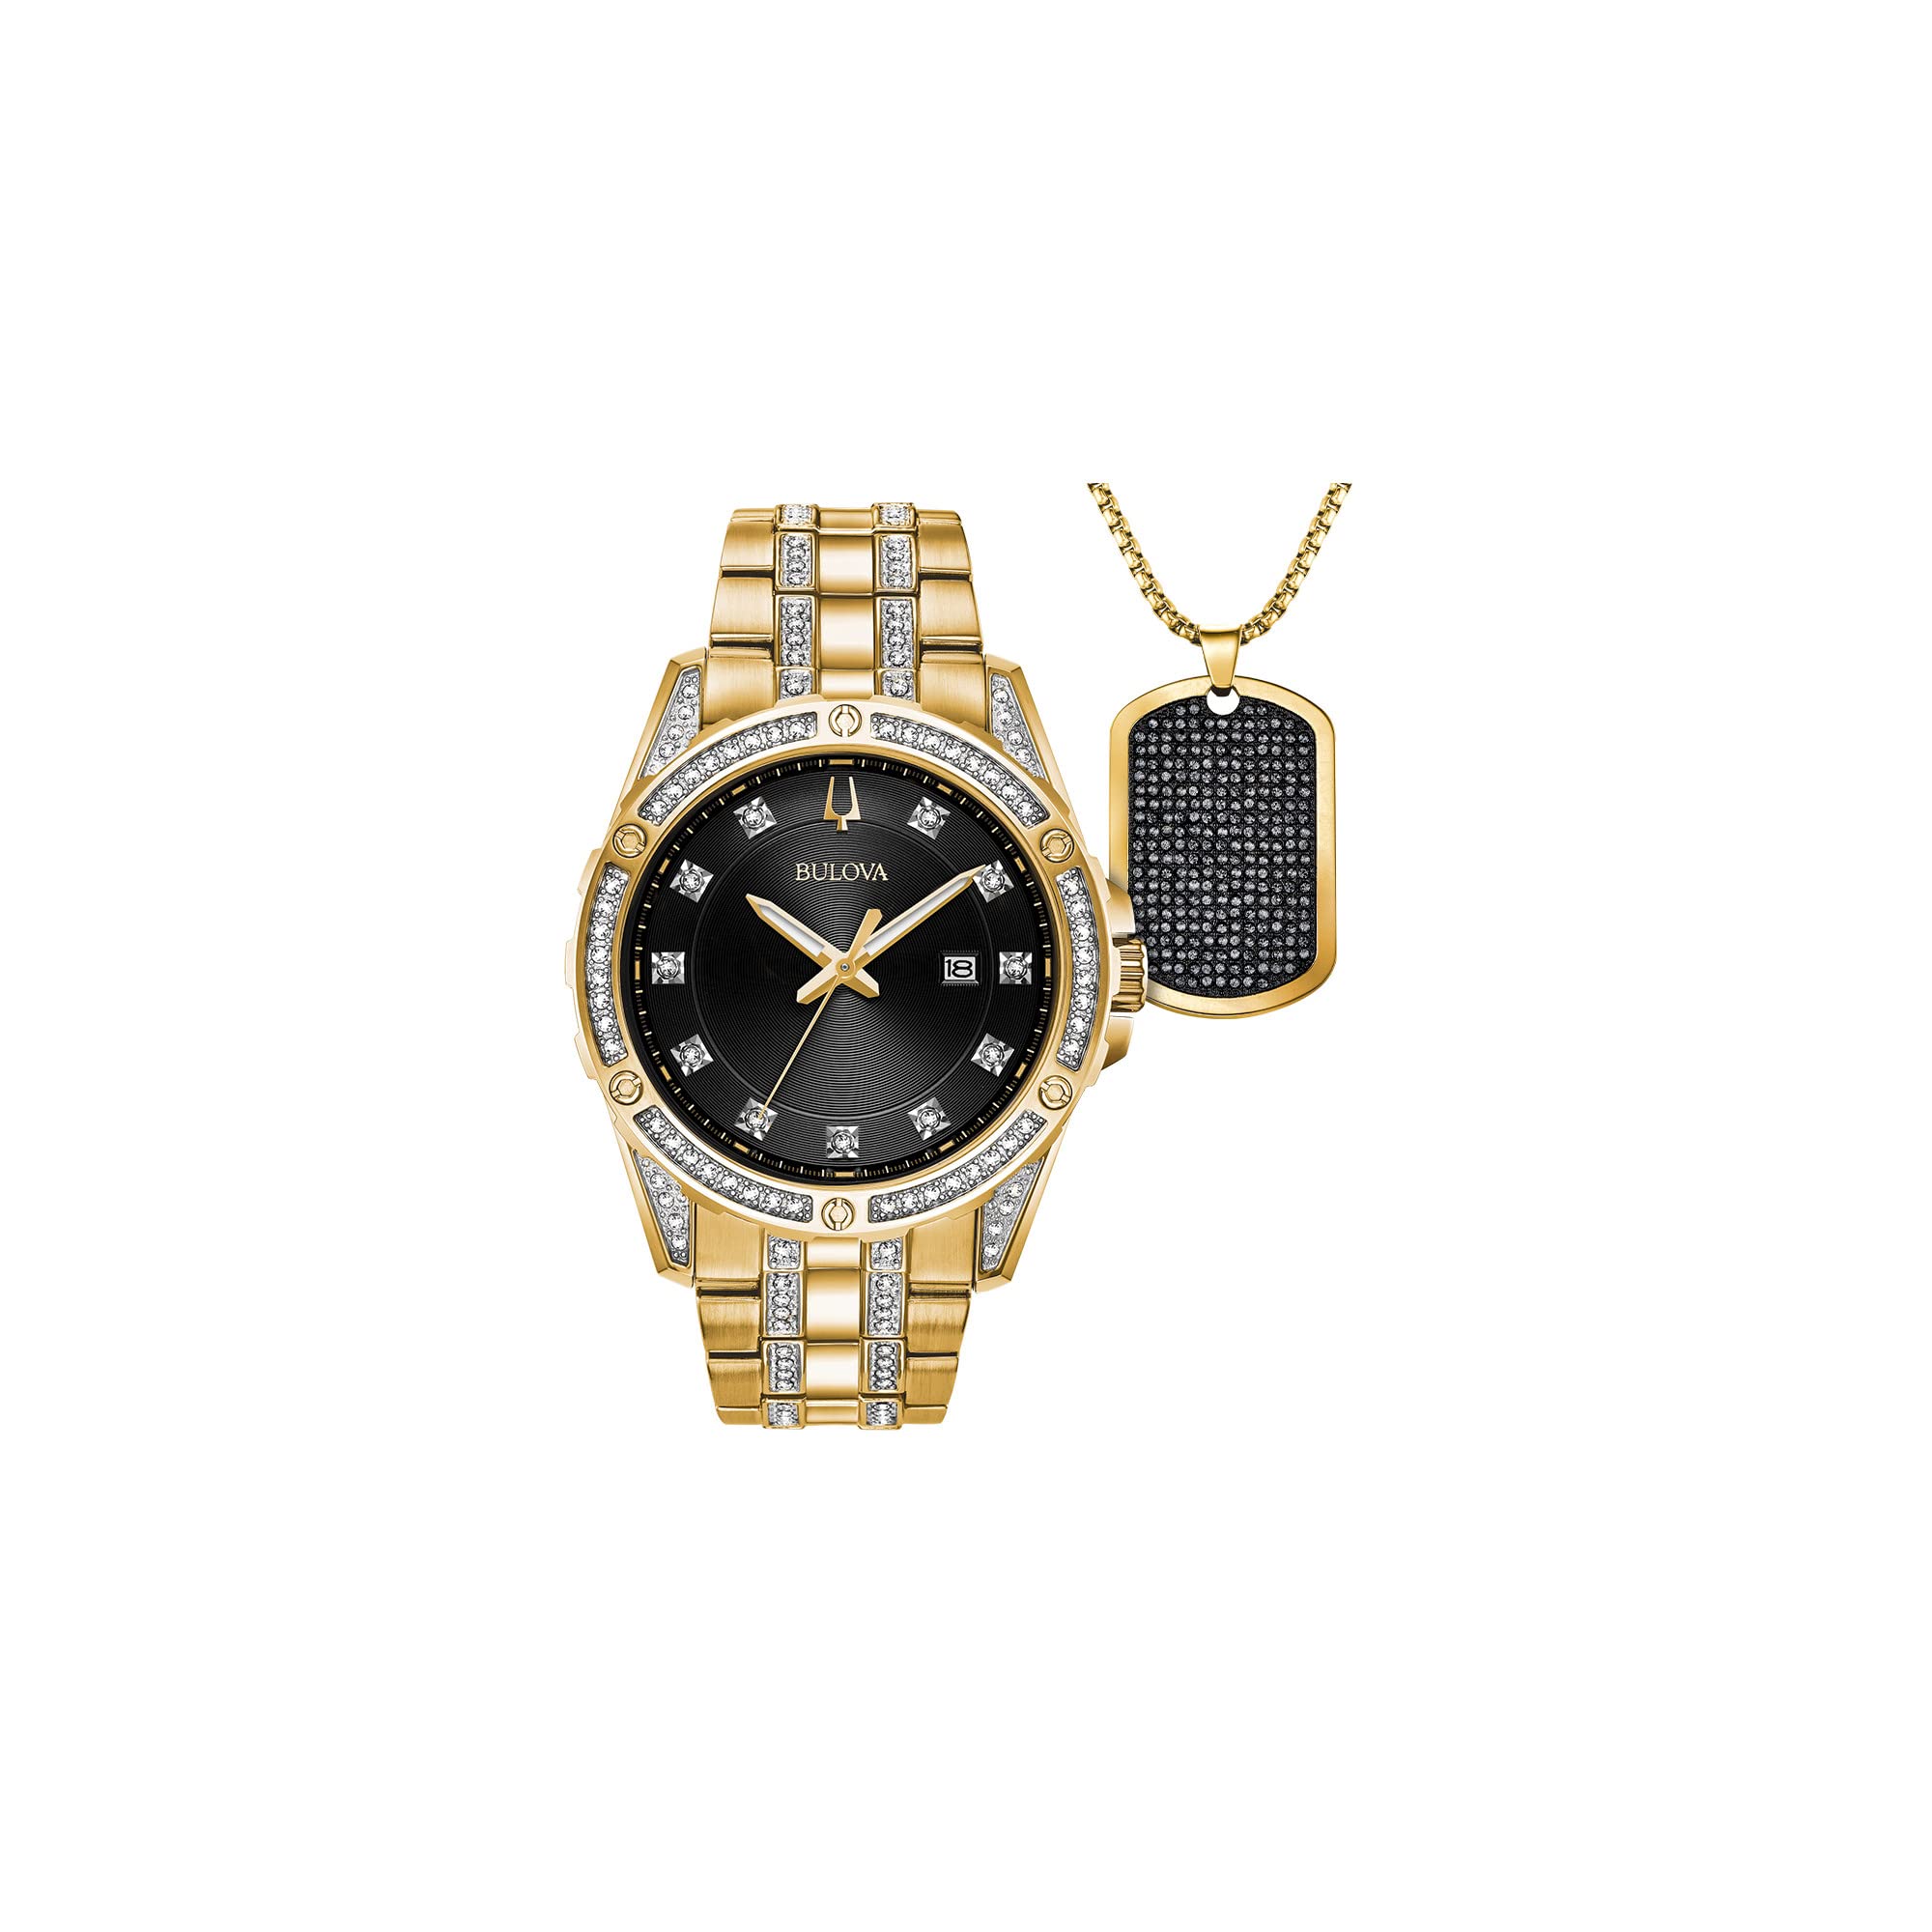 Bulova Men's Crystal Accented Gift Set with 3-Hand Date Quartz Watch and Dog Tag Box Chain Necklace